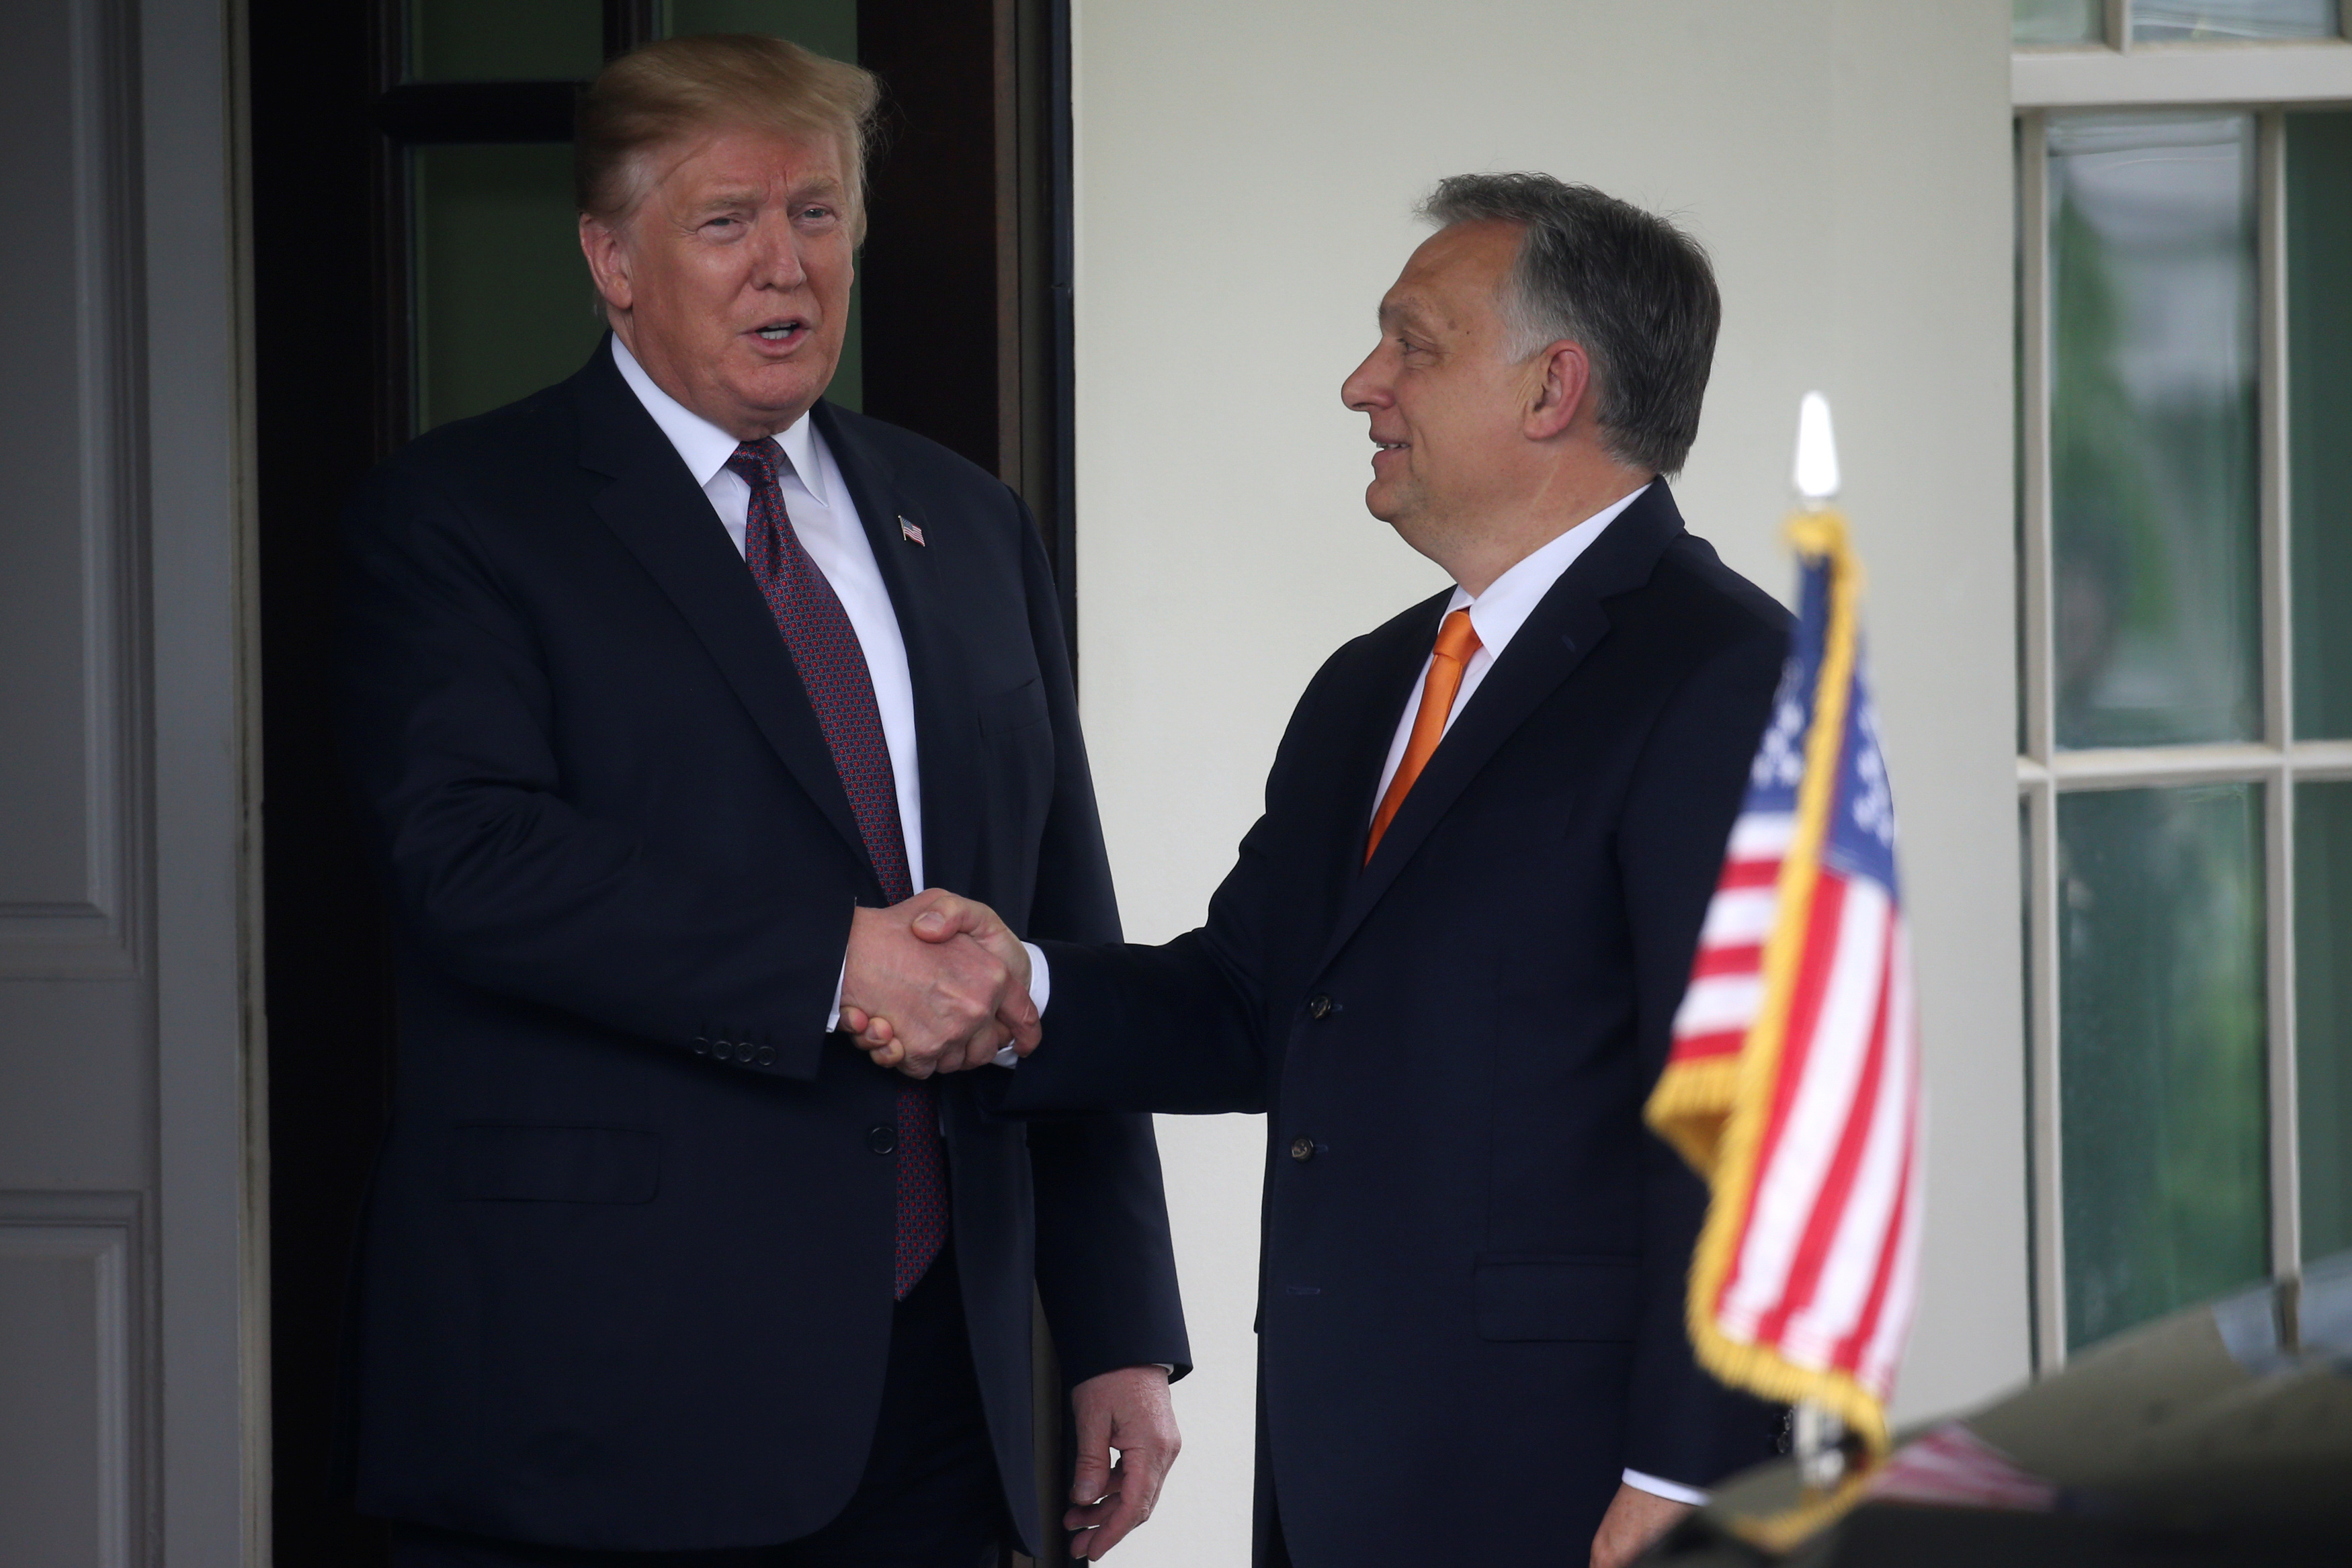 U.S. President Trump welcomes Hungary's Prime Minister Orban at the White House in Washington